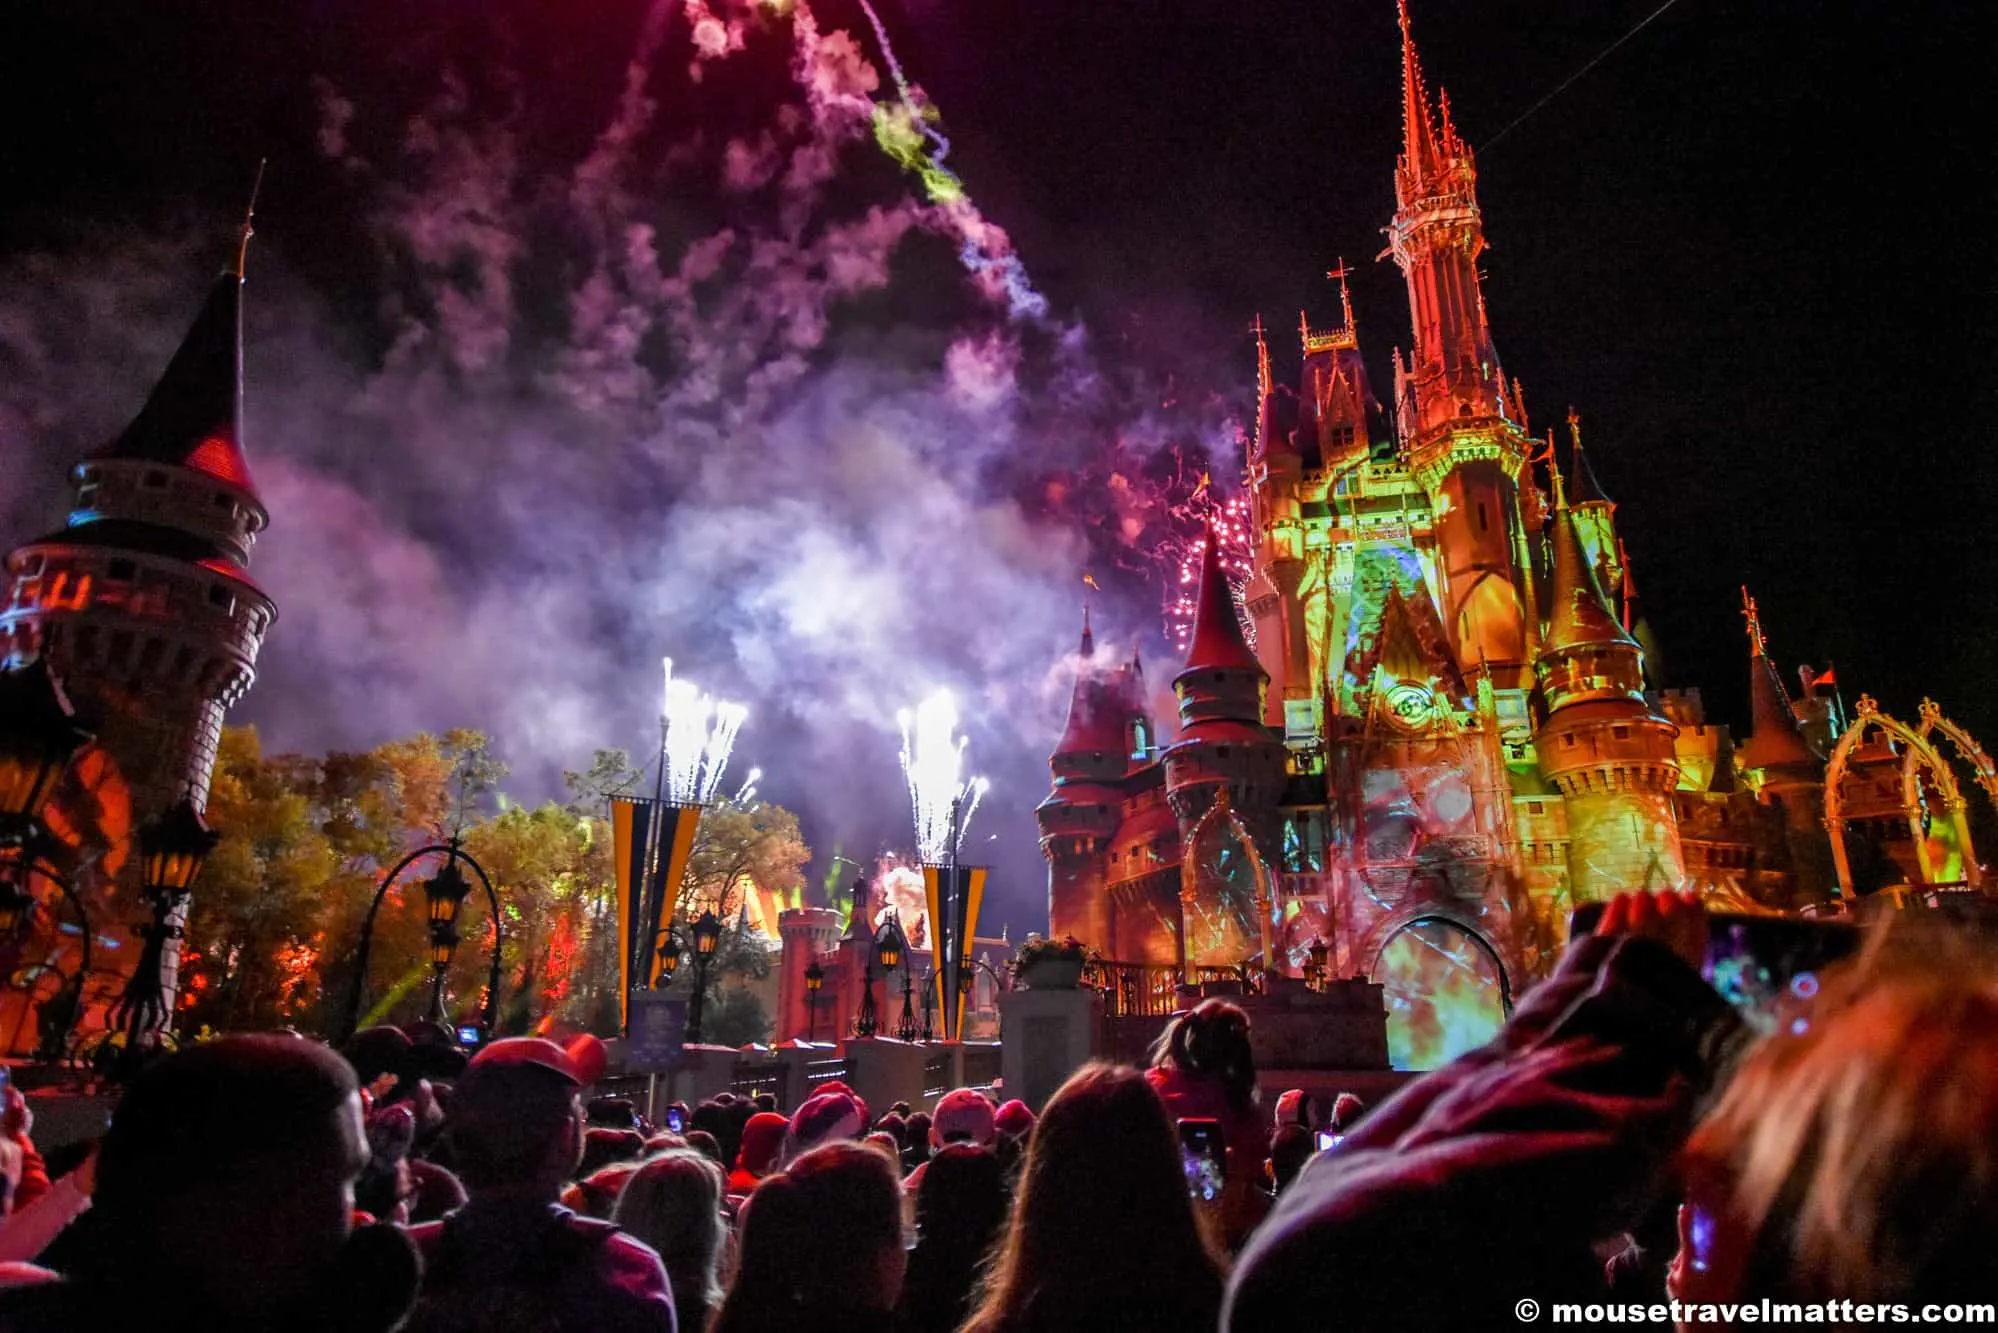 Heading to Magic Kingdom? Learn how the opening procedure works | What time you can enter | How Extra Magic Hours are handled | Are pre-park breakfasts still worth it? | Disney World | #magickingdom #disneyworld #DisneyTips